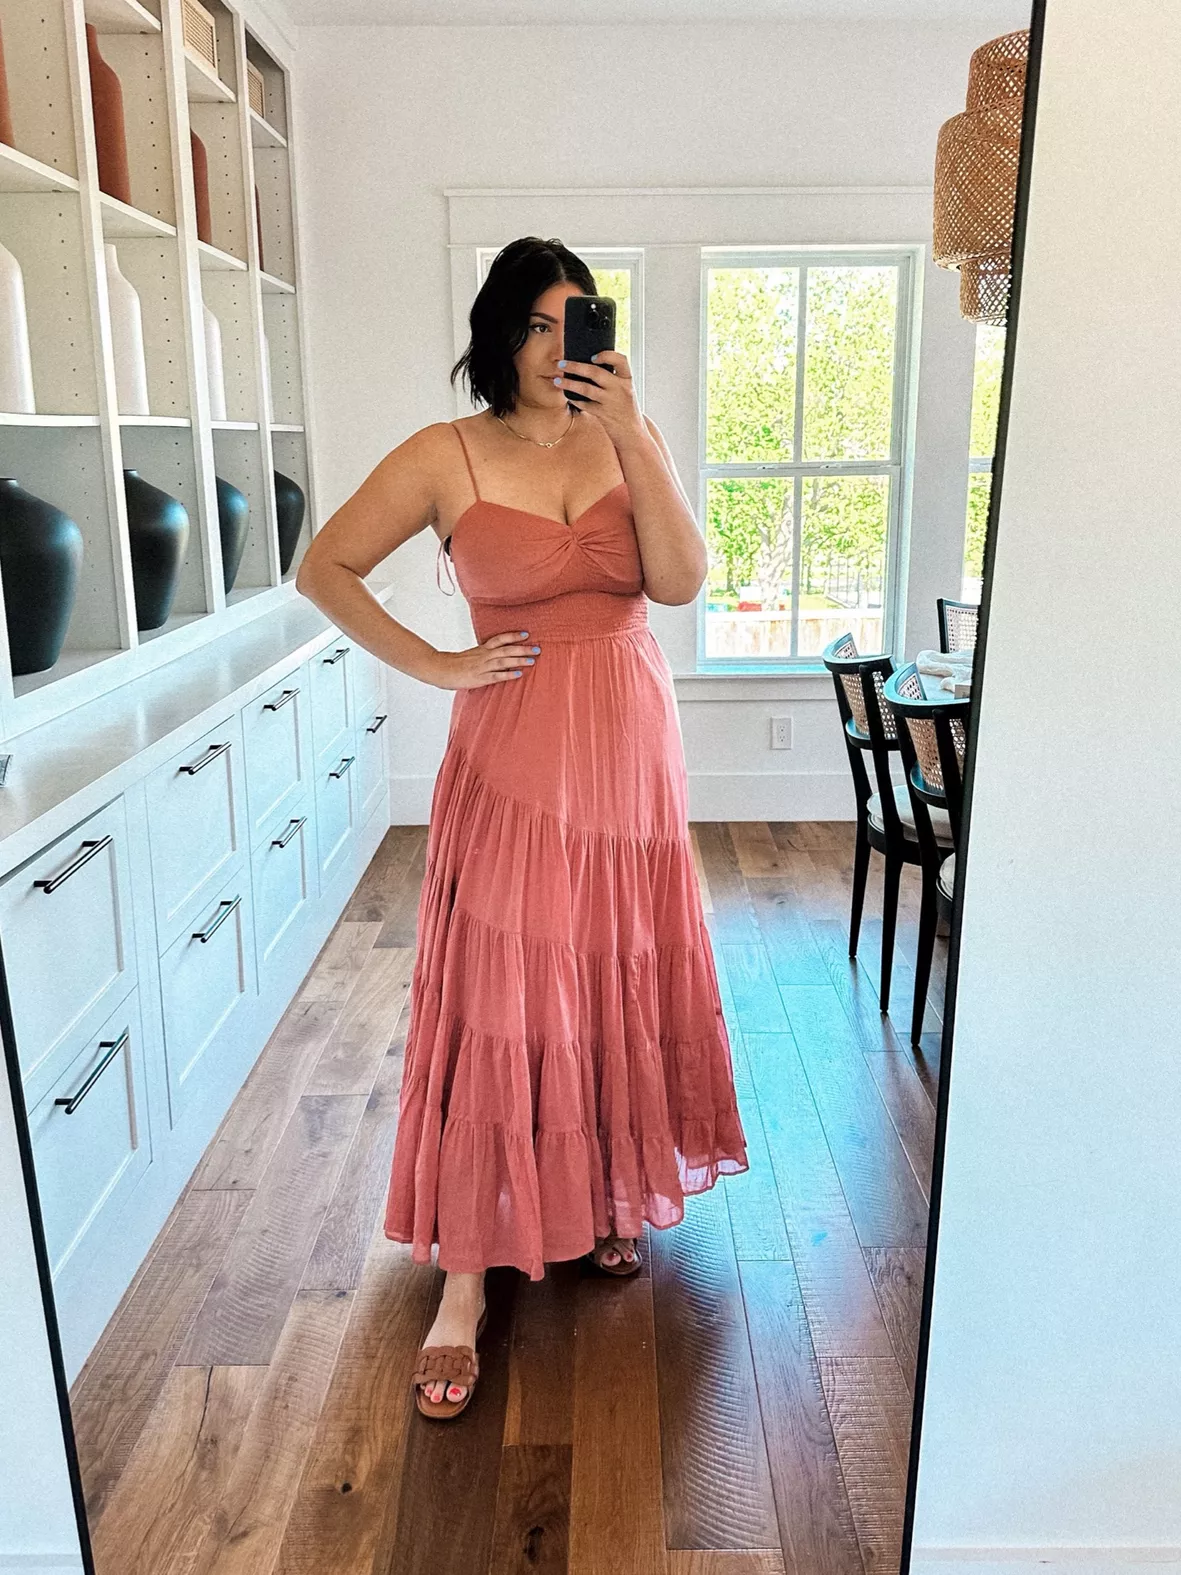 Maxi Dresses for Moms With Curves or Big Boobs - The Mom Edit